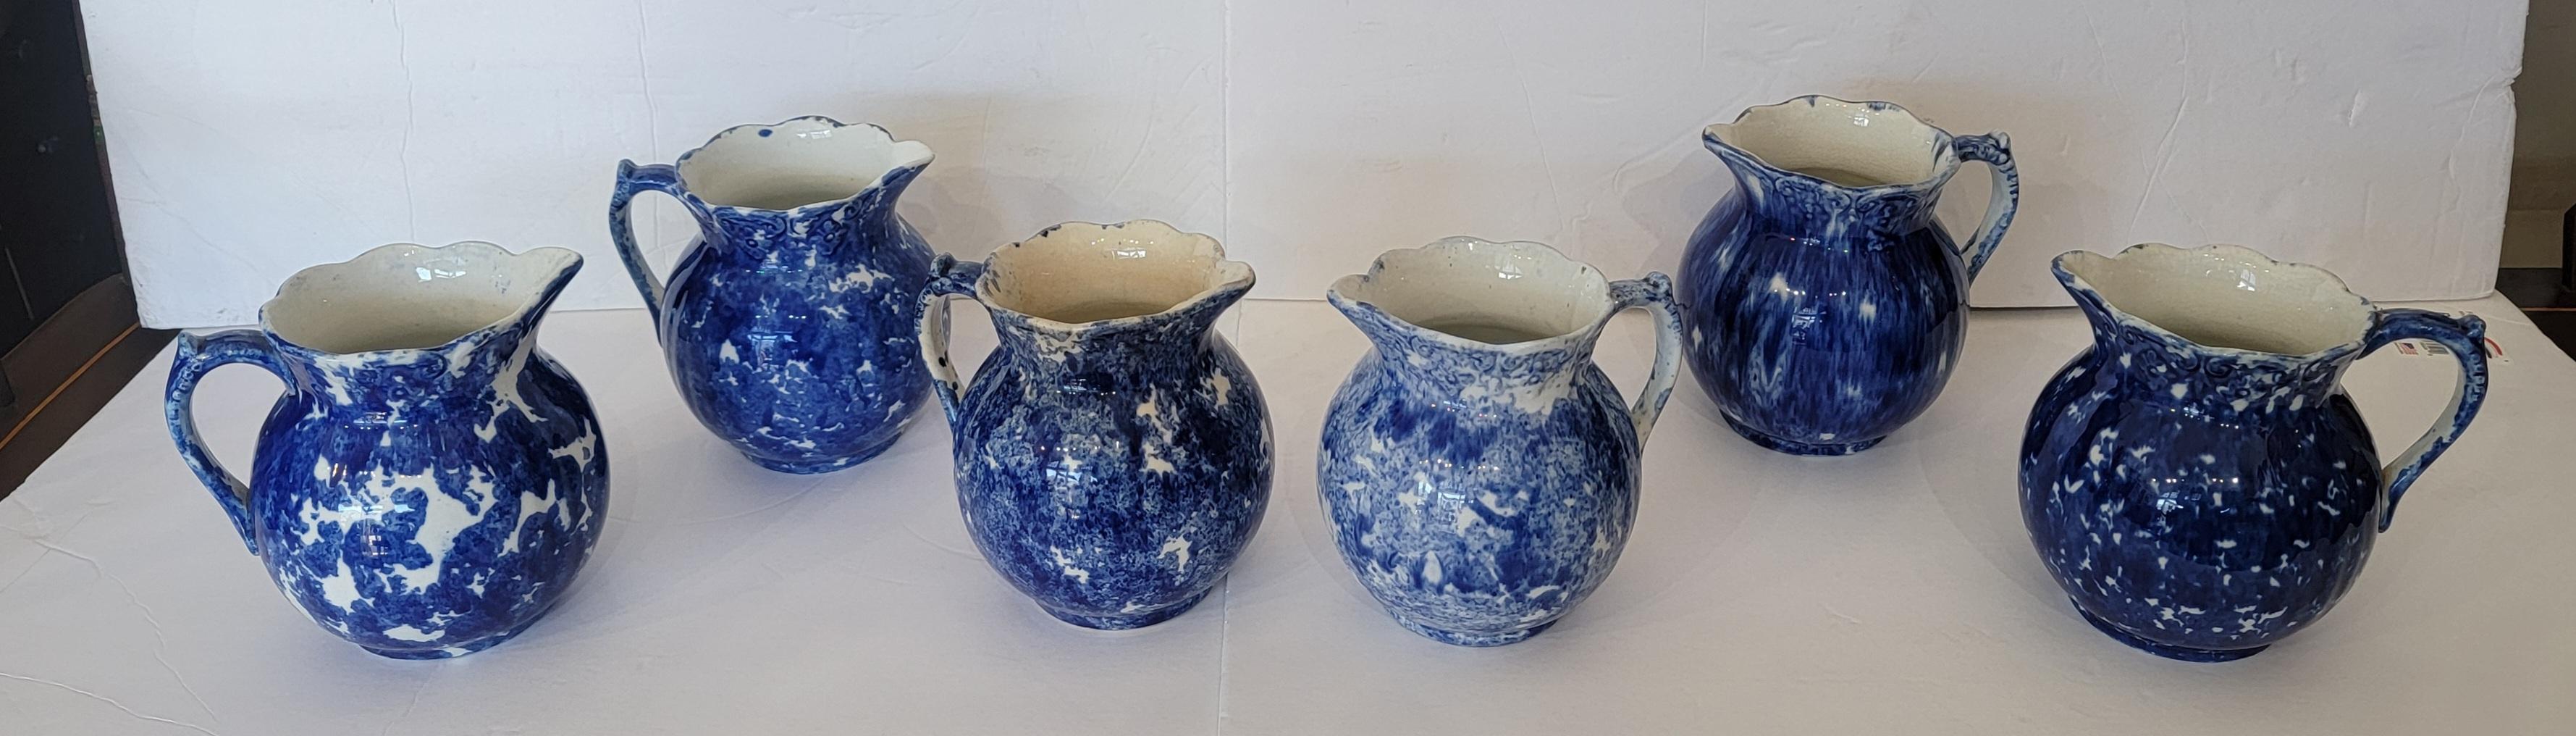 This collection of 19thc Sponge ware pitchers are all in good condition (no chips or cracks ). It is so unusual to find a group like this all in mint condition.